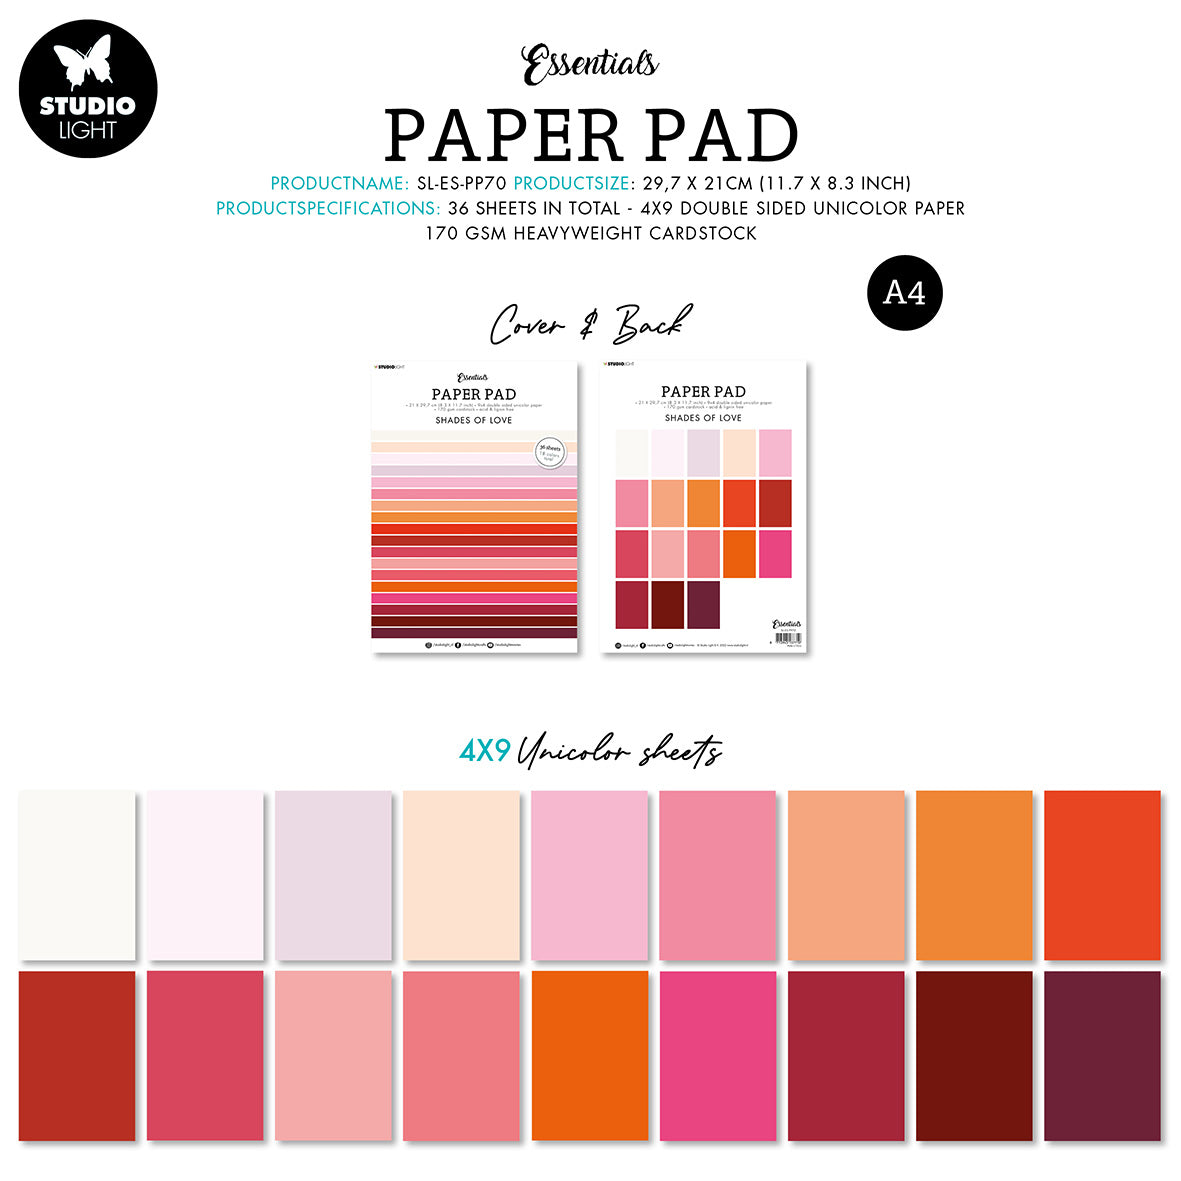 SL Paper Pad Double Sided Unicolor Shades Of Love Essentials 210x297x9mm 36 SH nr.70